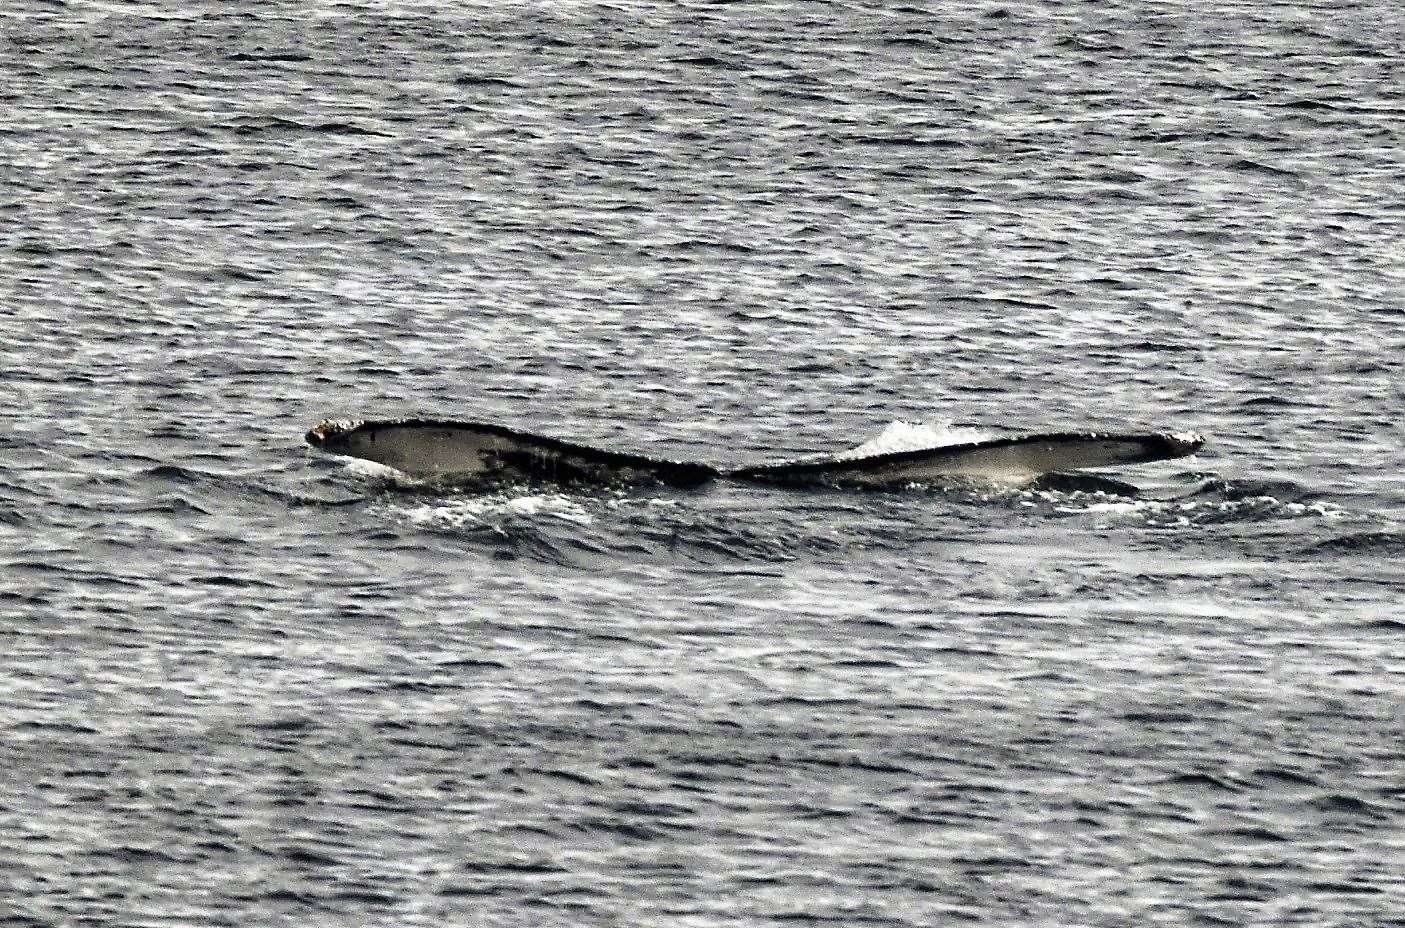 The humpback whale's fluke breaks the surface near Achastle shore on Wednesday evening. Picture: Andy Knight